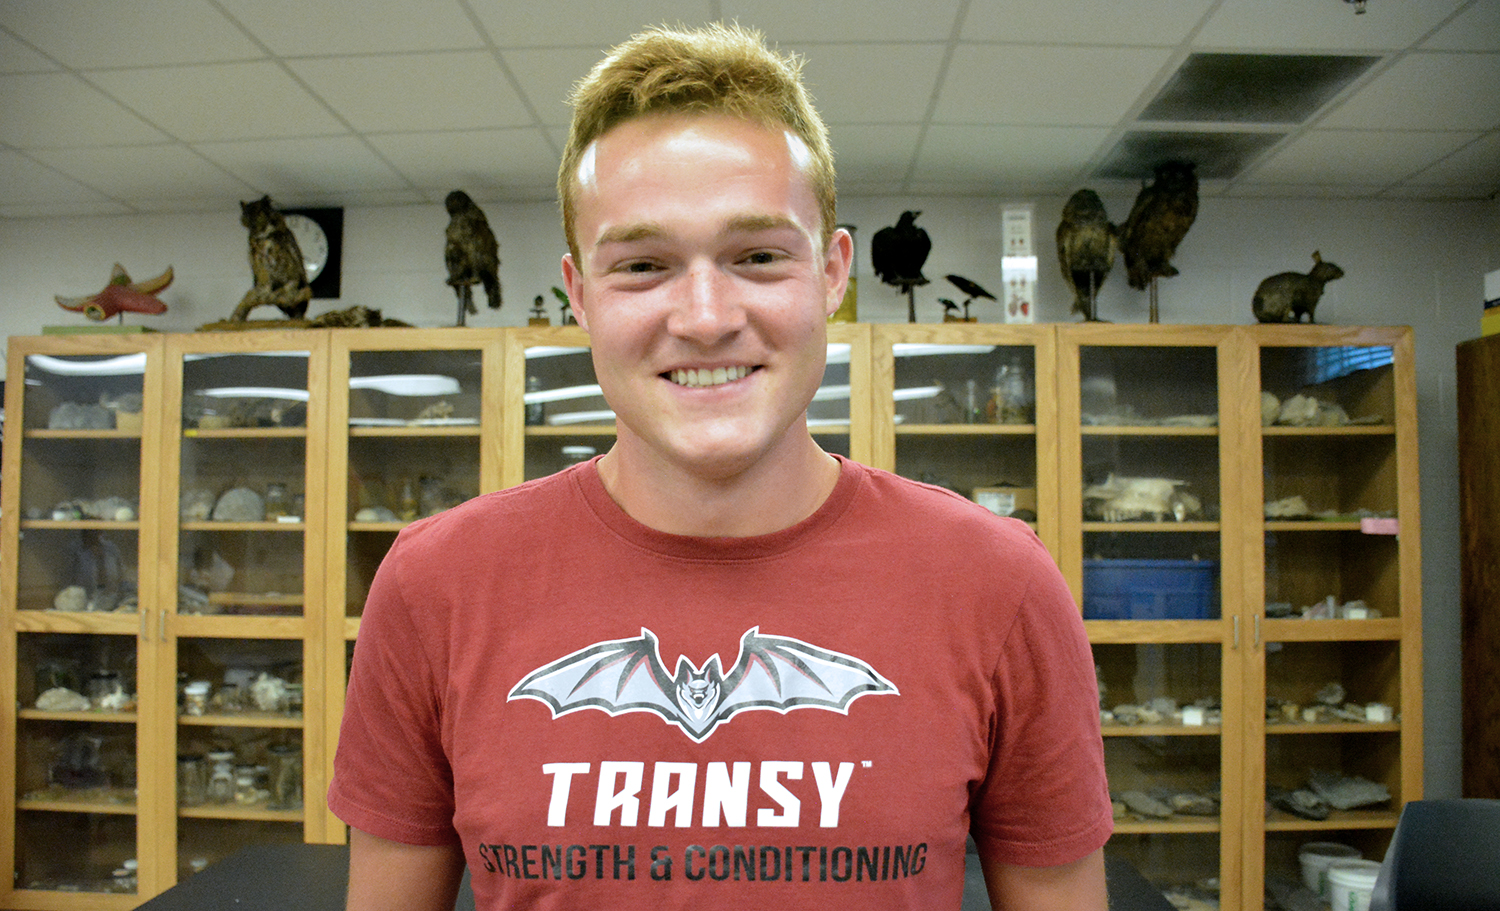 Gross anatomy and finches: how a competitive swimmer makes the most of being pre-med at Transy